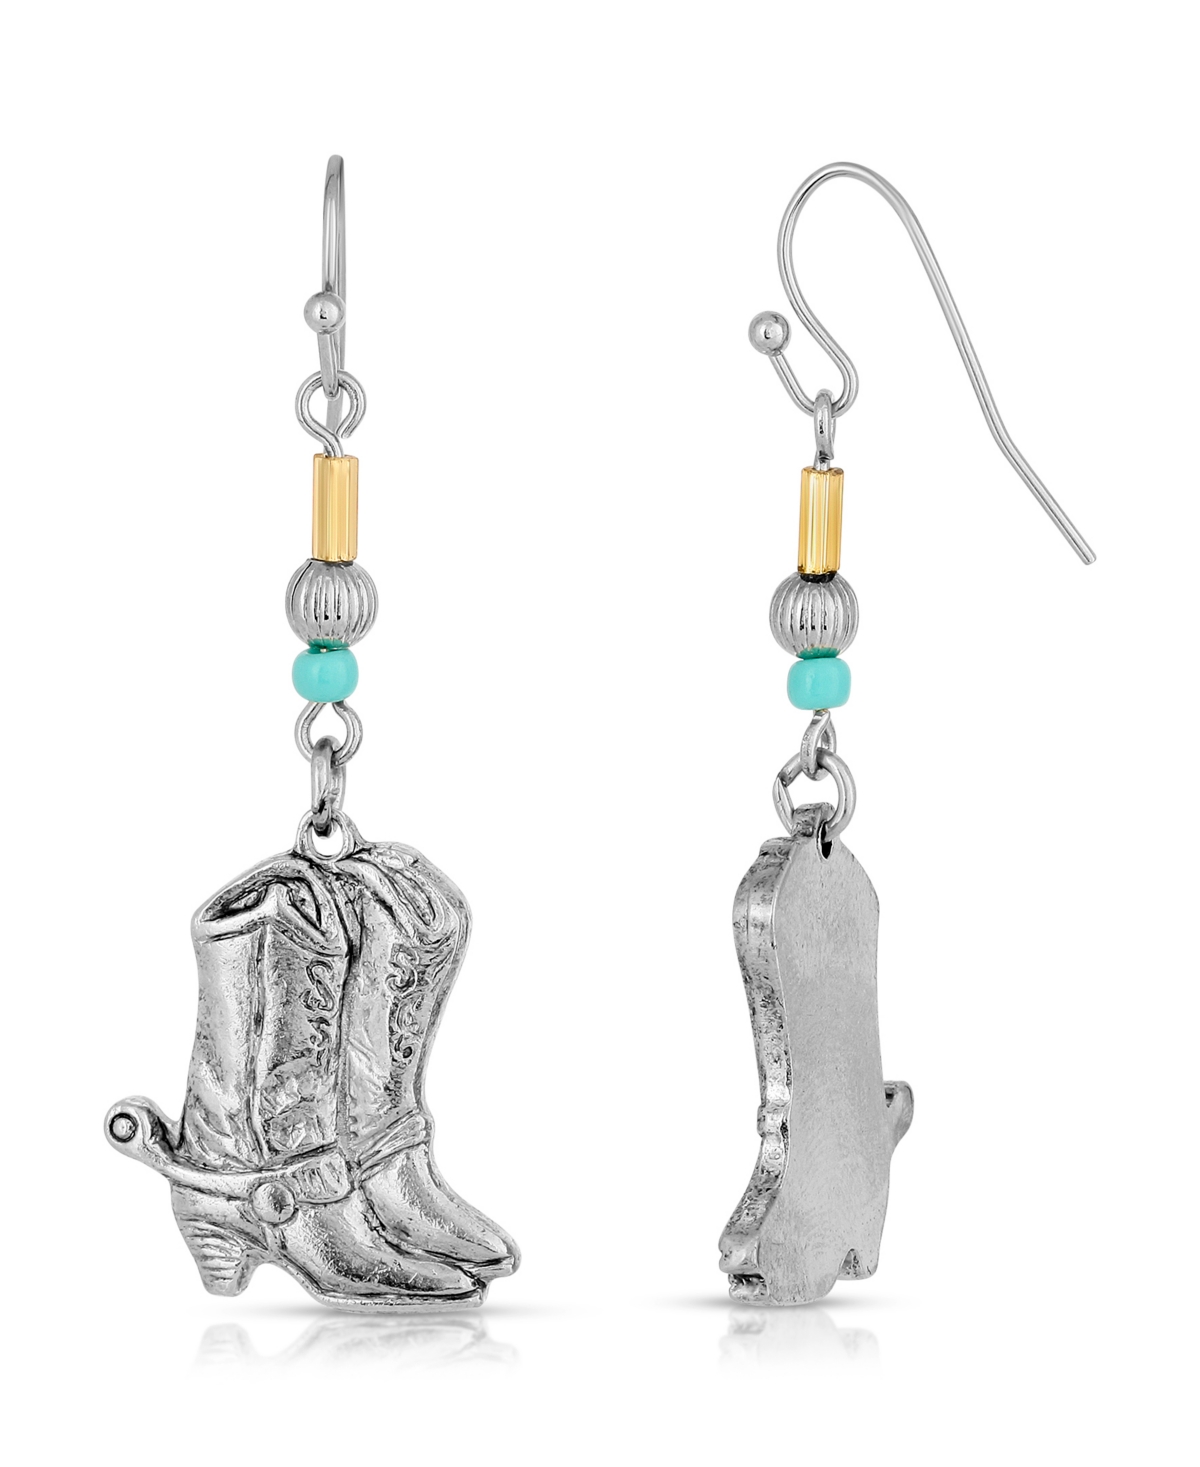 Silver-Tone and Imitation Turquoise Accent Western Boots Drop Earrings - Gray